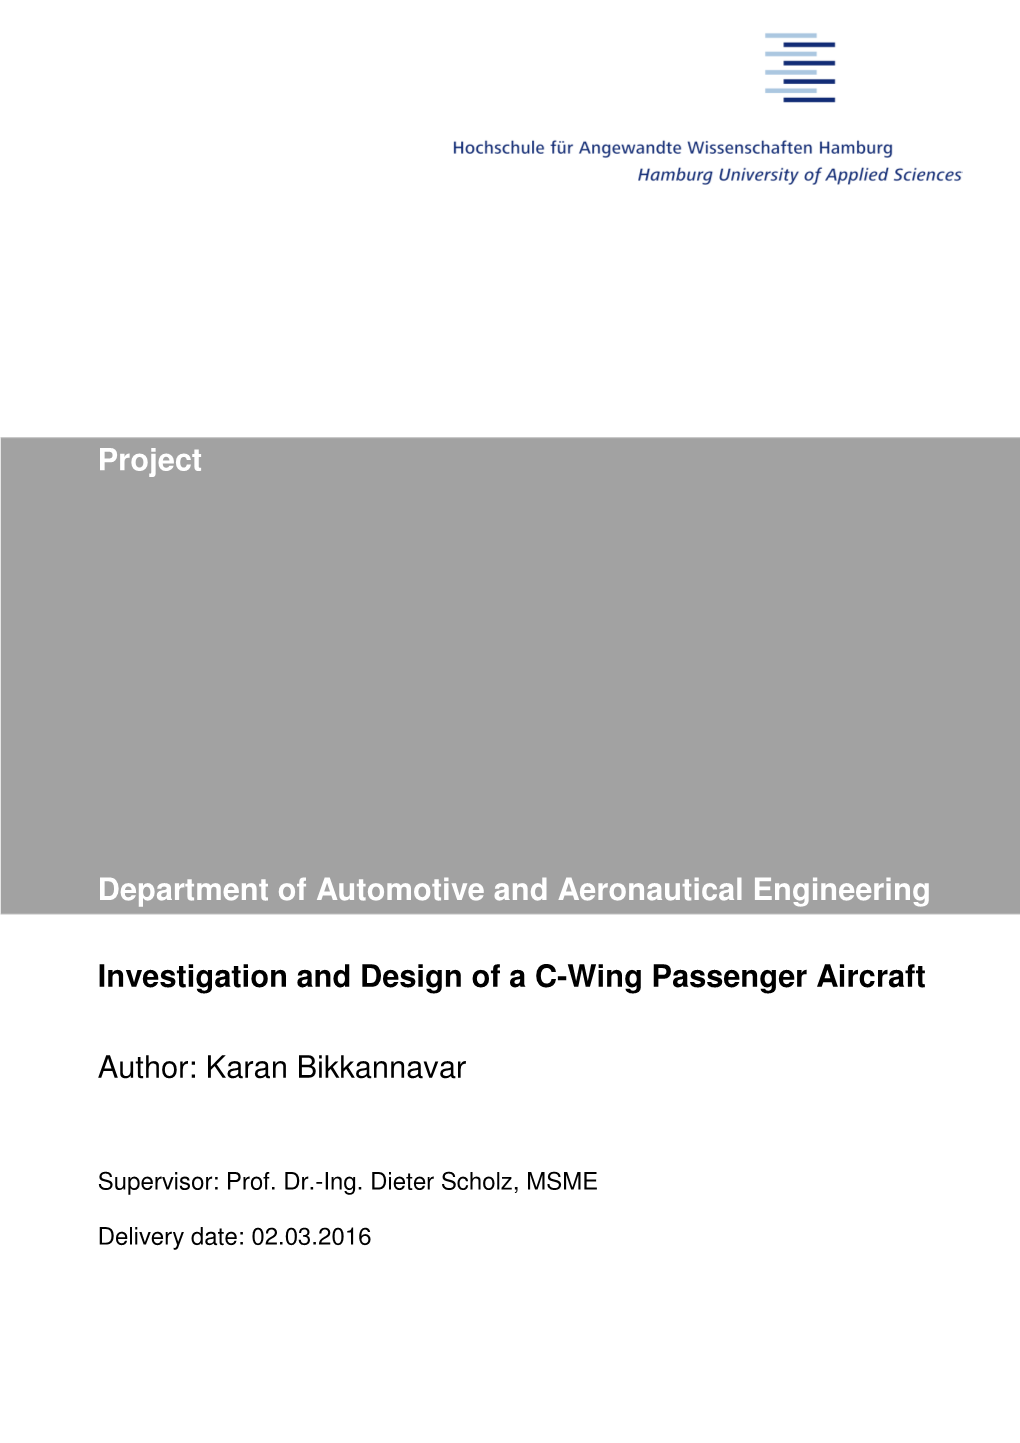 Investigation and Design of a C-Wing Passenger Aircraft